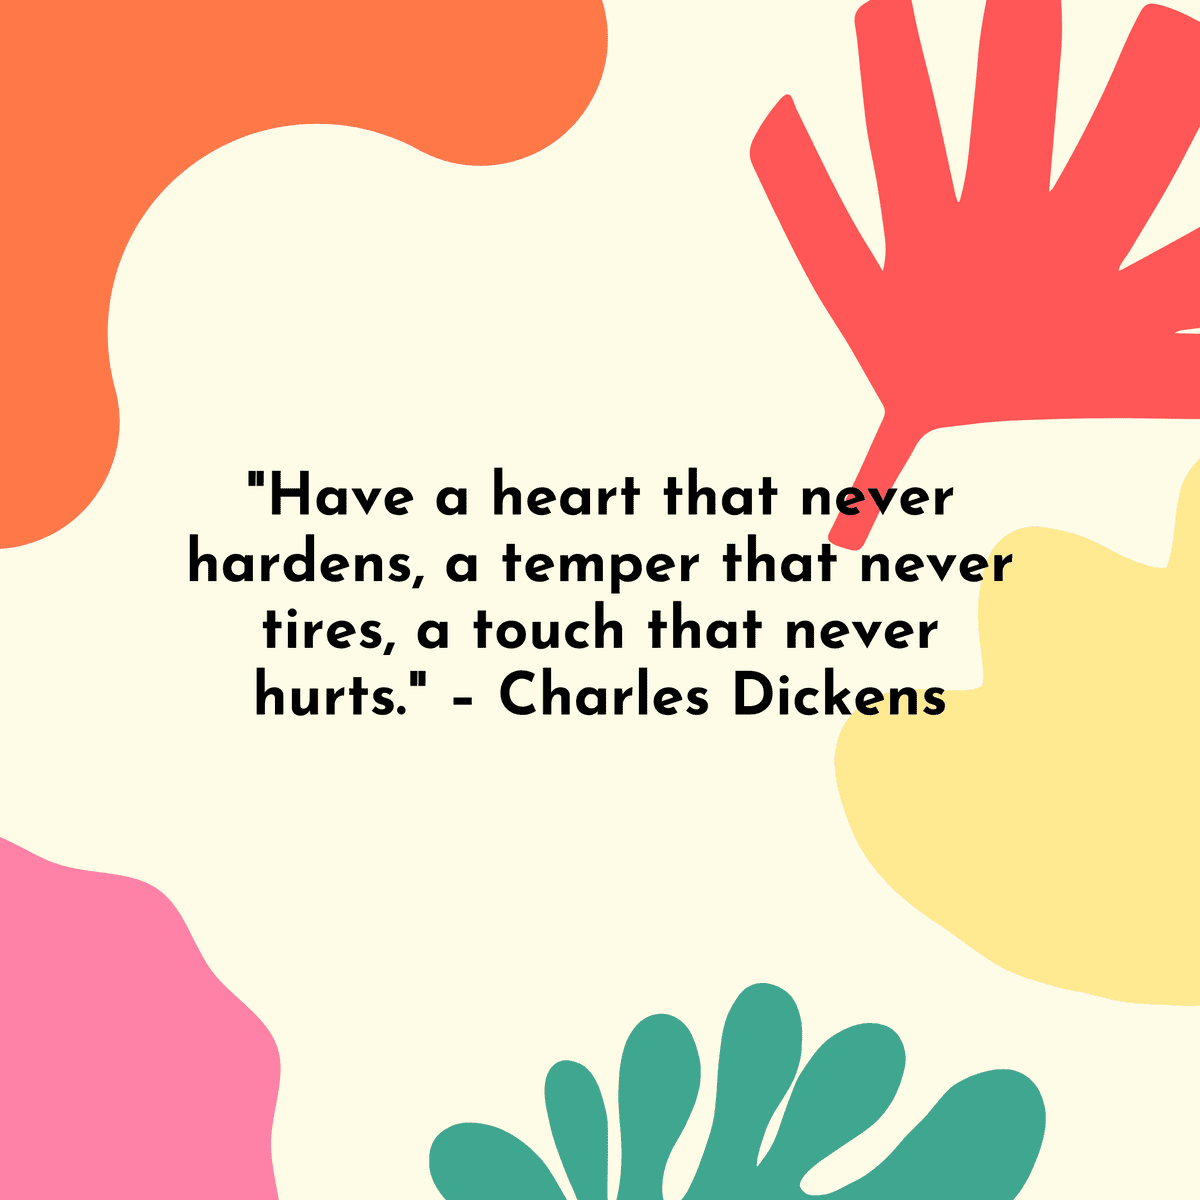 "Have a heart that never hardens, a temper that never tires, a touch that never hurts." – Charles Dickens